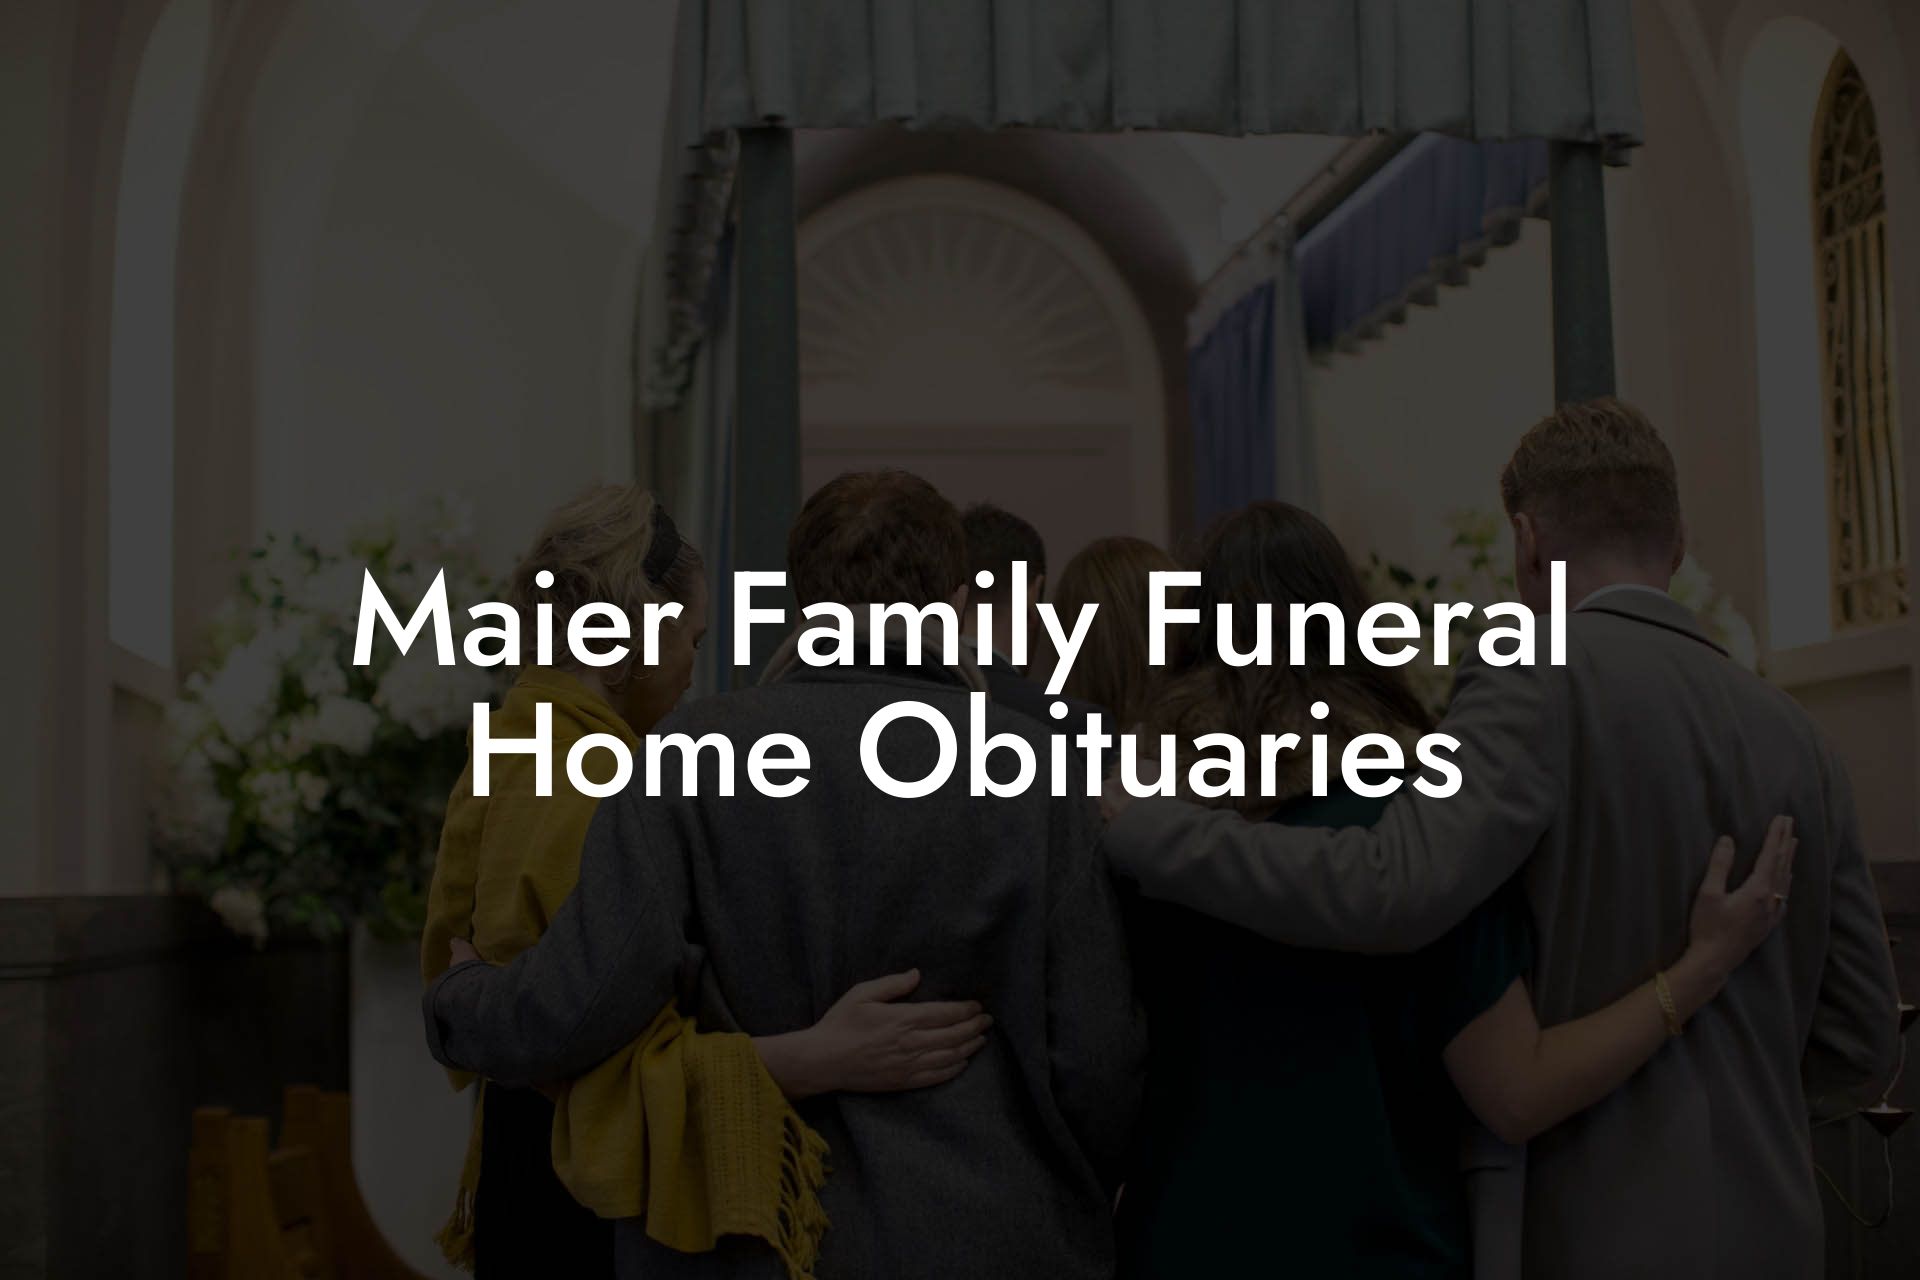 Maier Family Funeral Home Obituaries